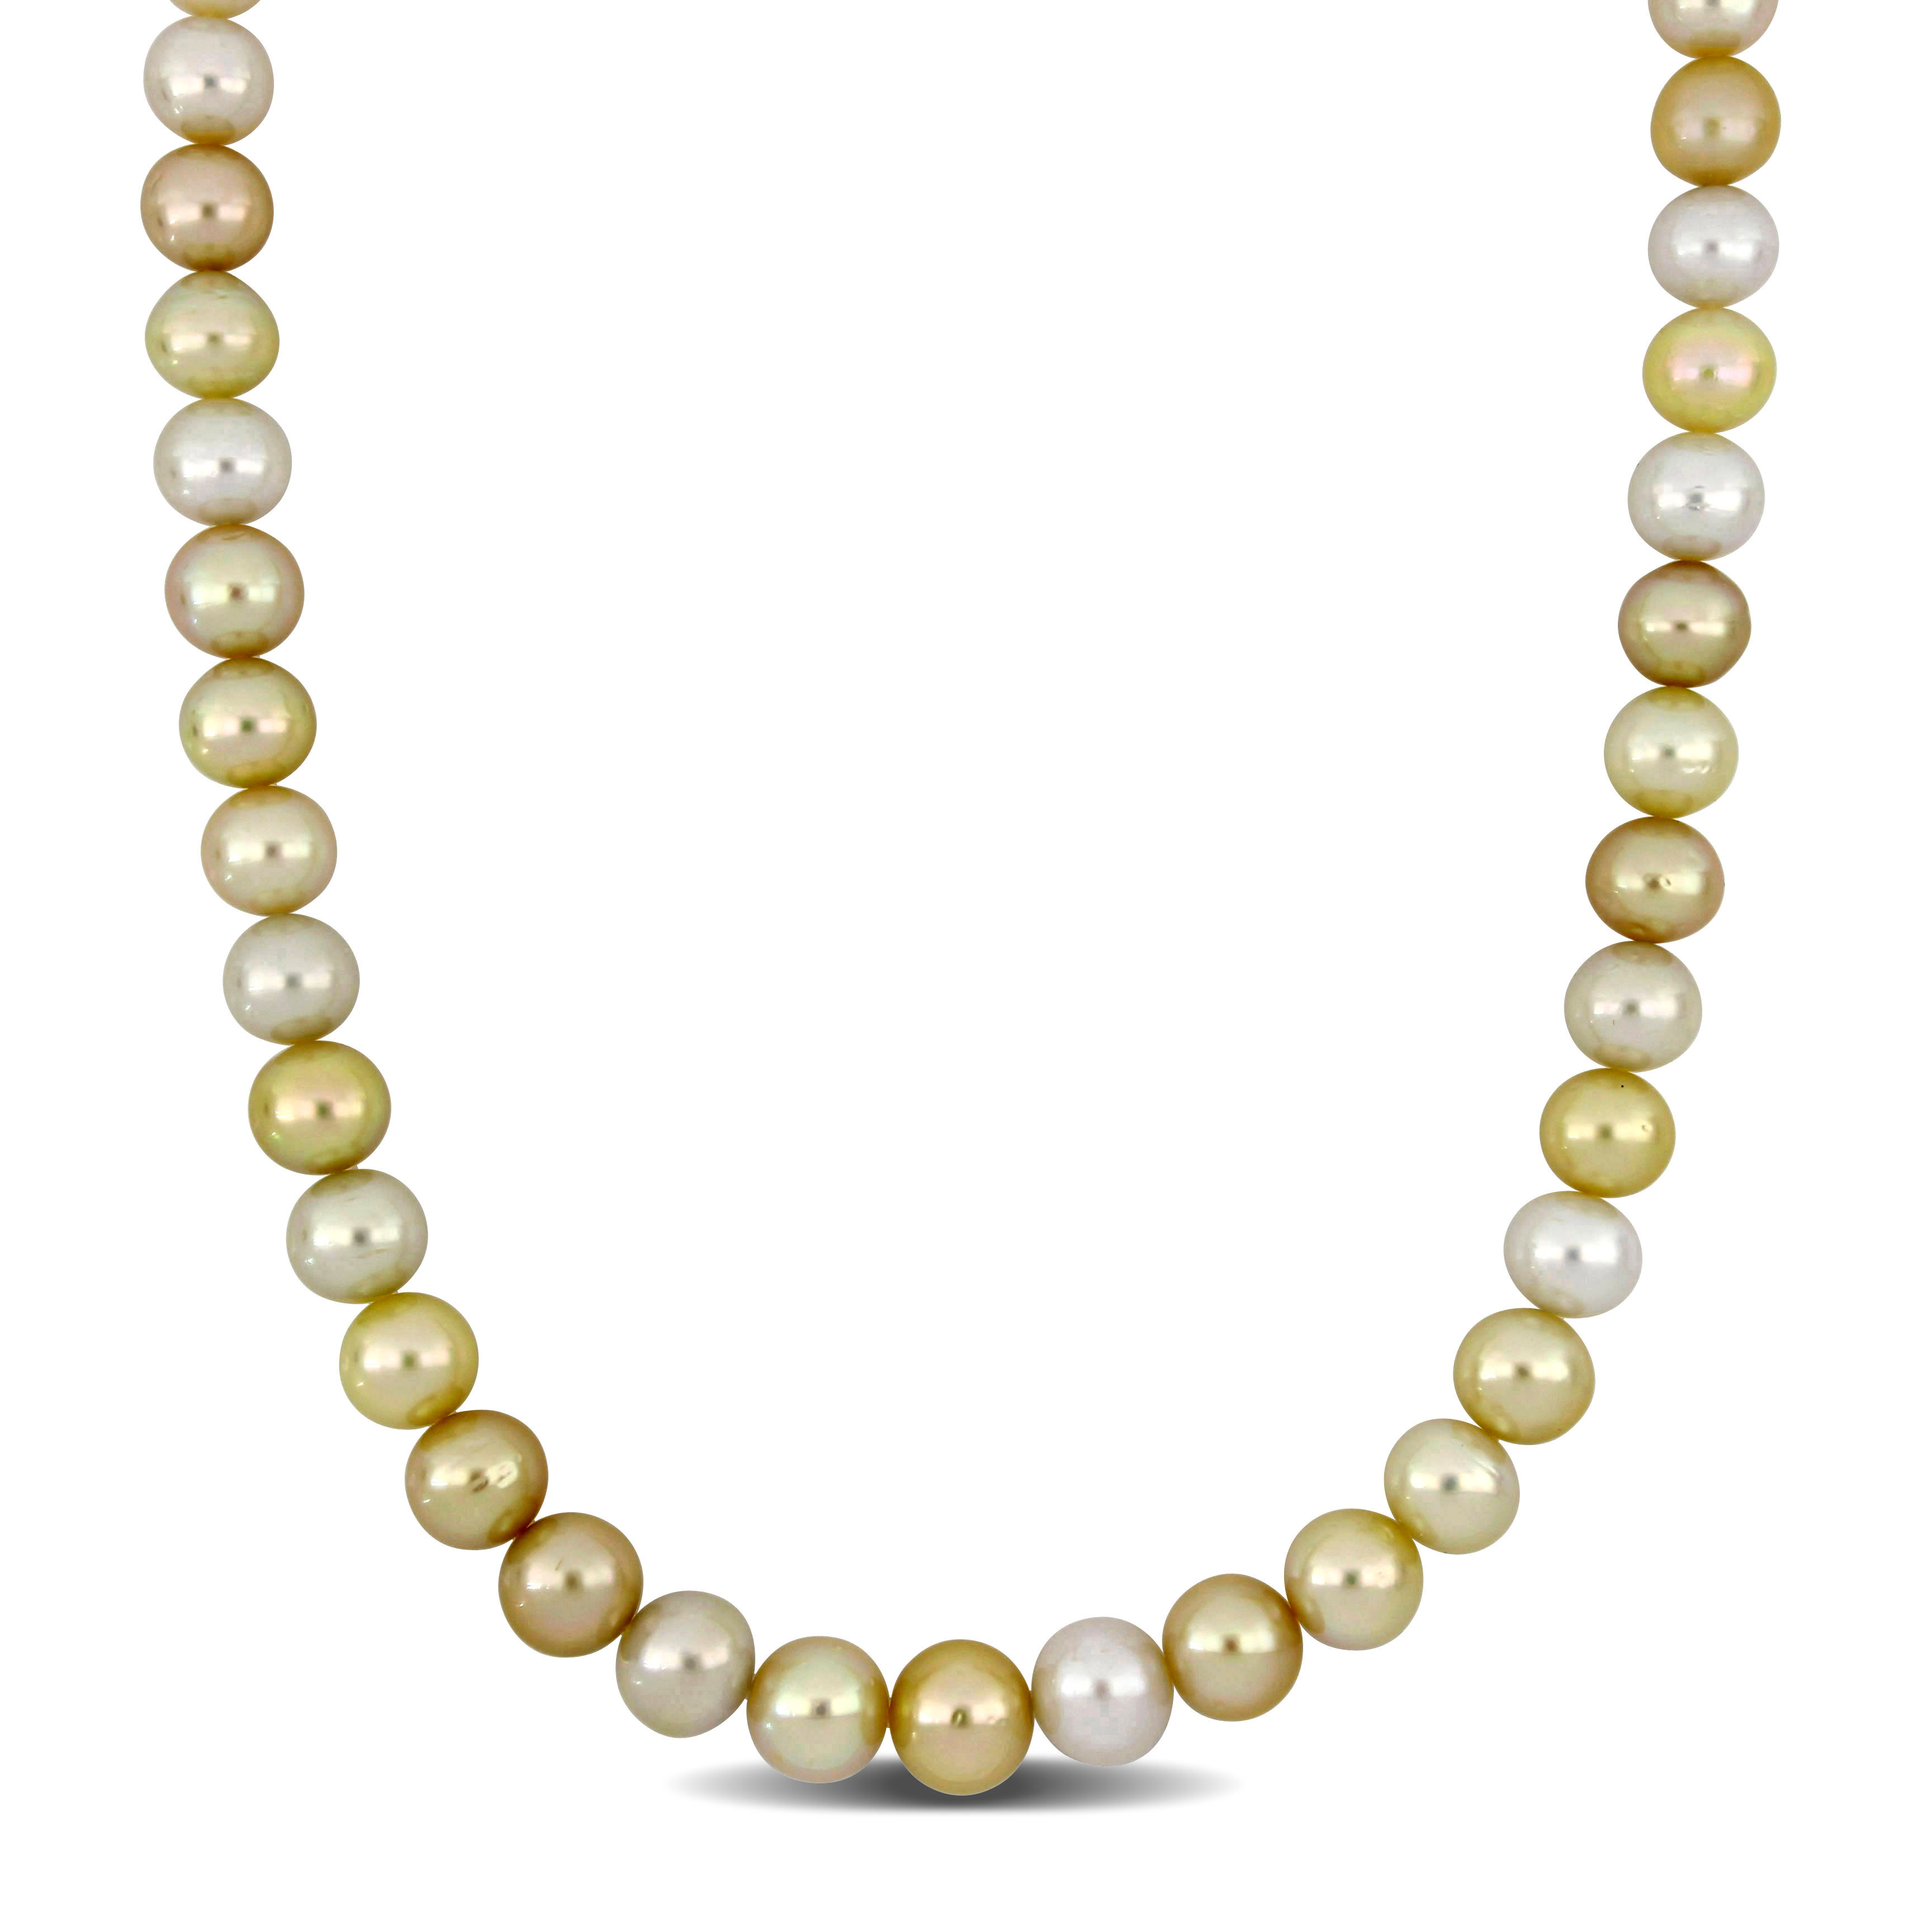 8-10 MM White and Golden South Sea Cultured Pearl Multi-Colored Necklace in 14k Yellow Gold - 18 in